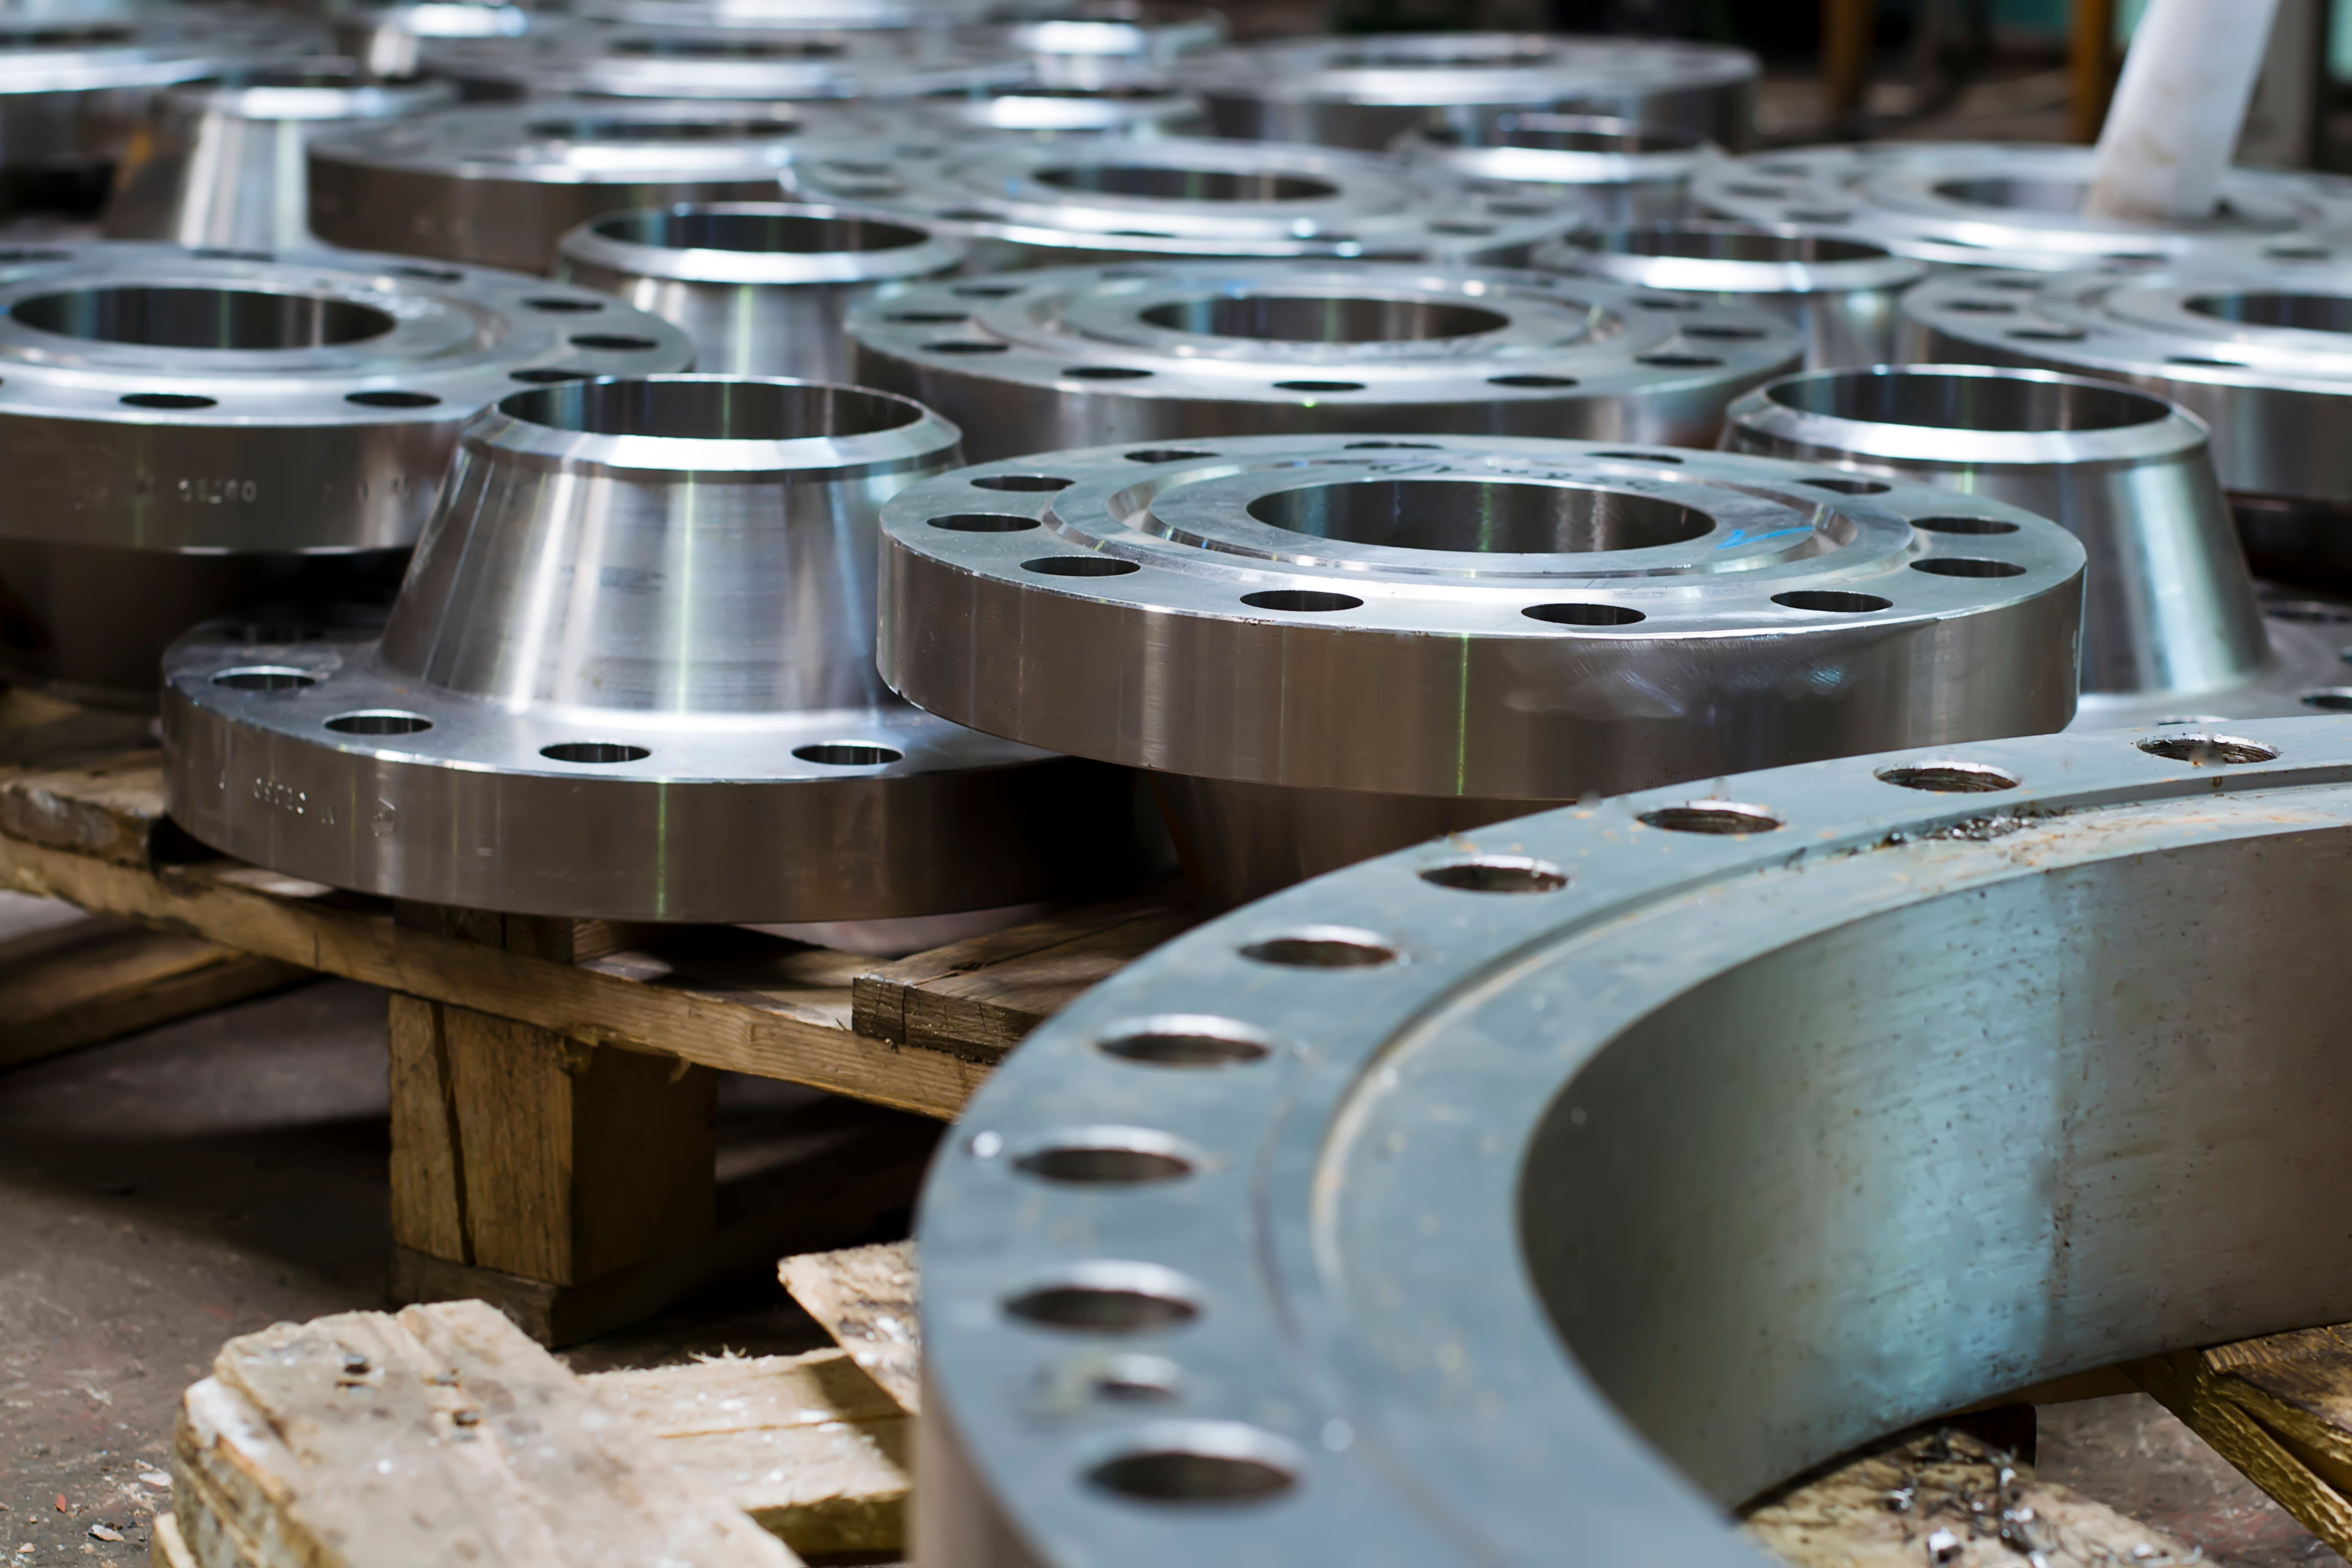 Hardware flanges, pipe flanges, flanges for heat exchangers